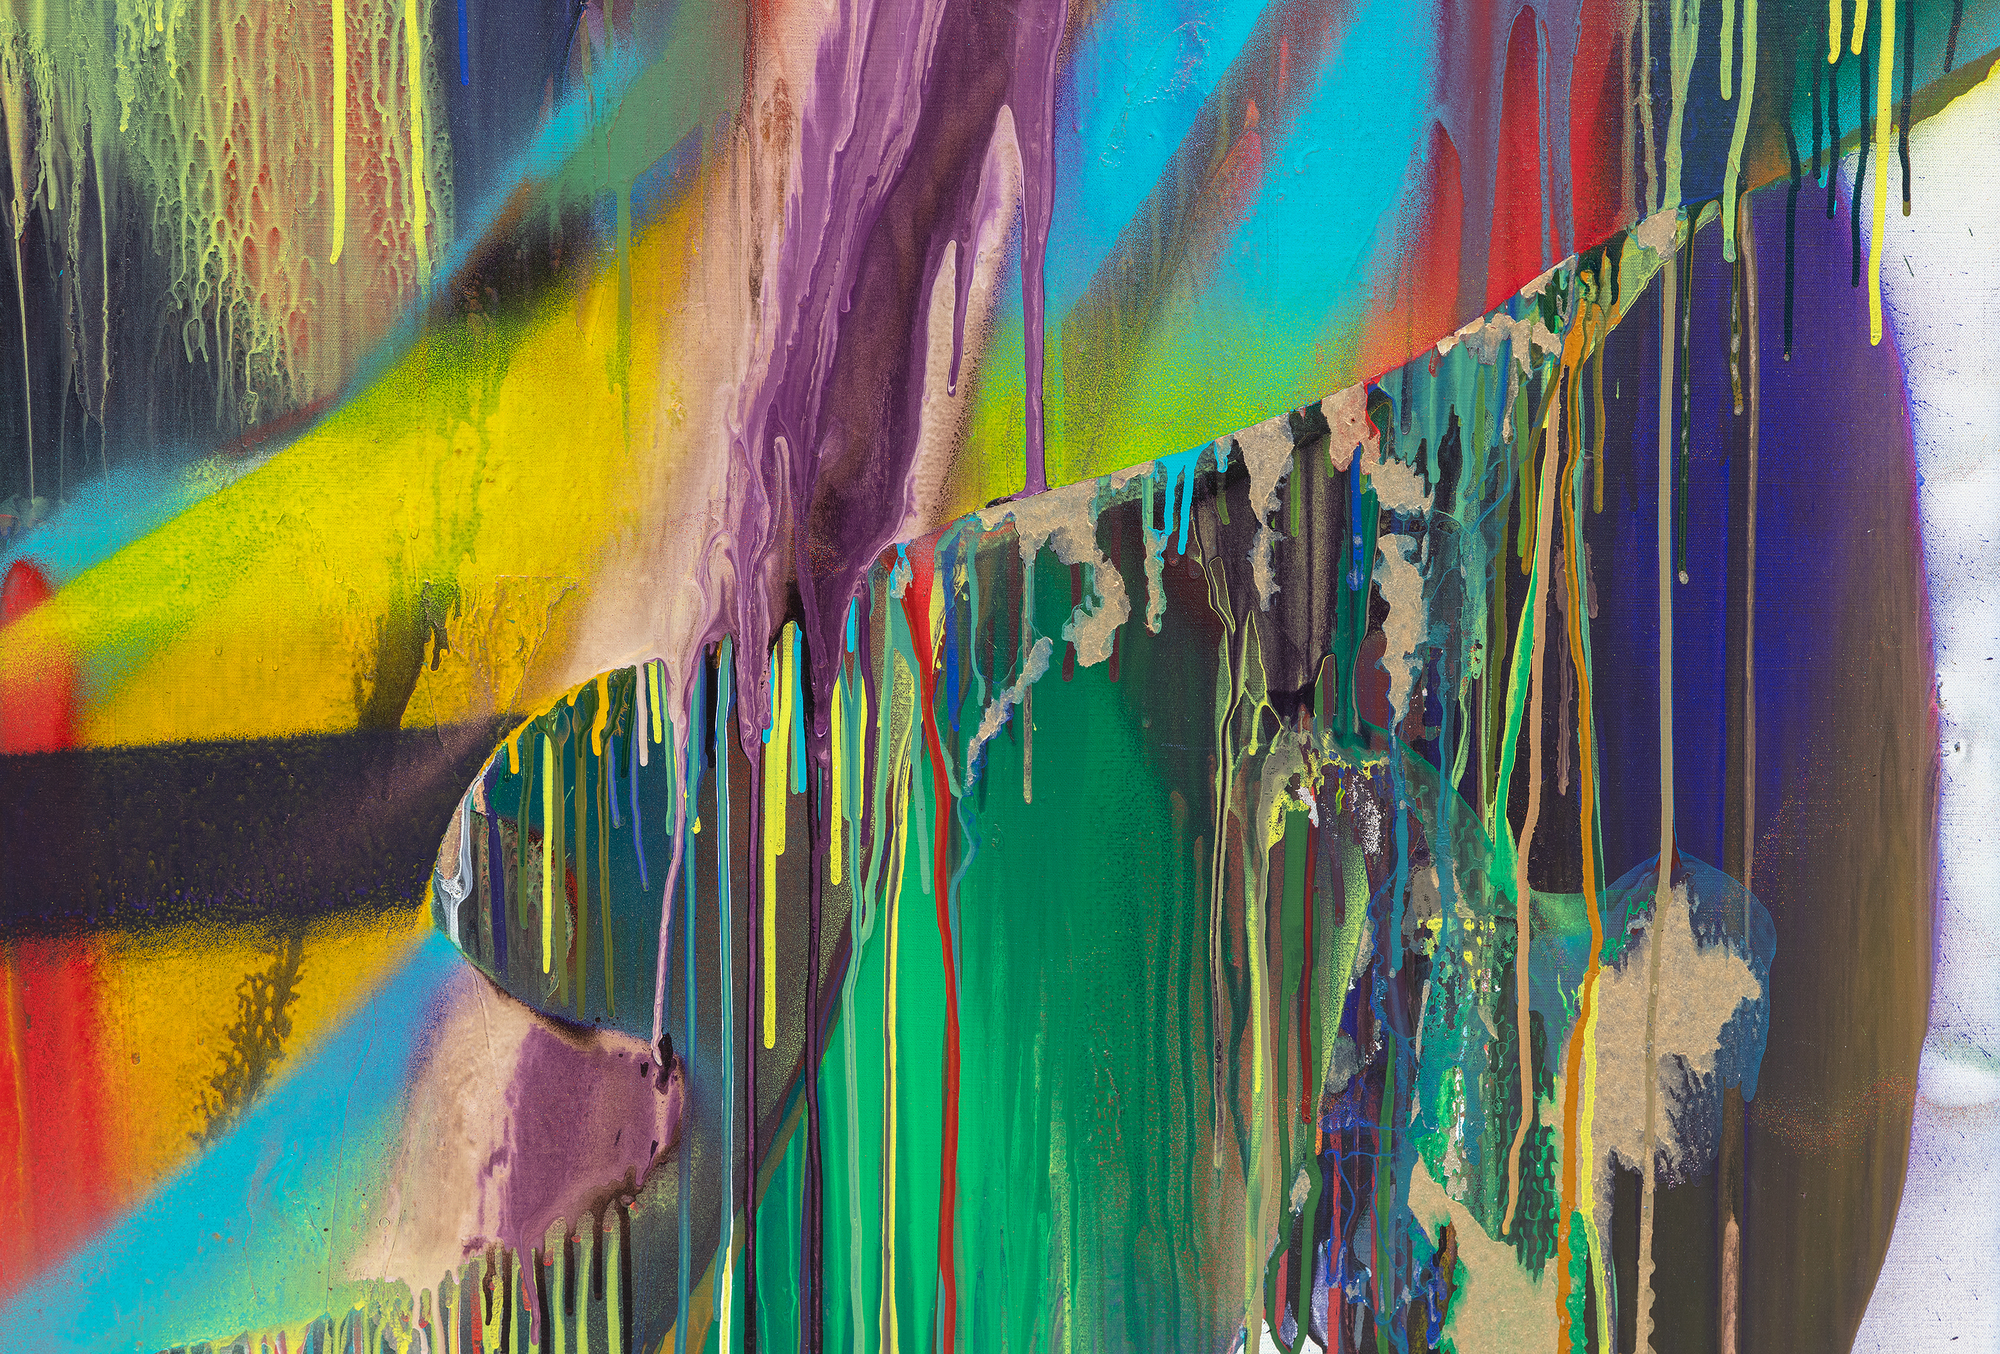 Katharine Grosse's Untitled of 2016 extends our appreciation of an artist who brings the same energy, boldness, and disregard for convention seen in her monumental architectural installations to the traditional medium of paint on canvas. The color explodes, lifted from a complex, richly layered surface of poured applications of paint that run, drizzle, or splatter, radiant transparent veils, and overlapping straps of color misted to create soft gradient transitions. The result is a fascinating impression of spatial depth and three-dimensionality. But it is also a tour de force that reveals Grosse's brilliance in blending chaos and control, spontaneity, and intention. Her range of techniques creates a compelling dialogue between the accidental and the deliberate, a hallmark of her unique style.